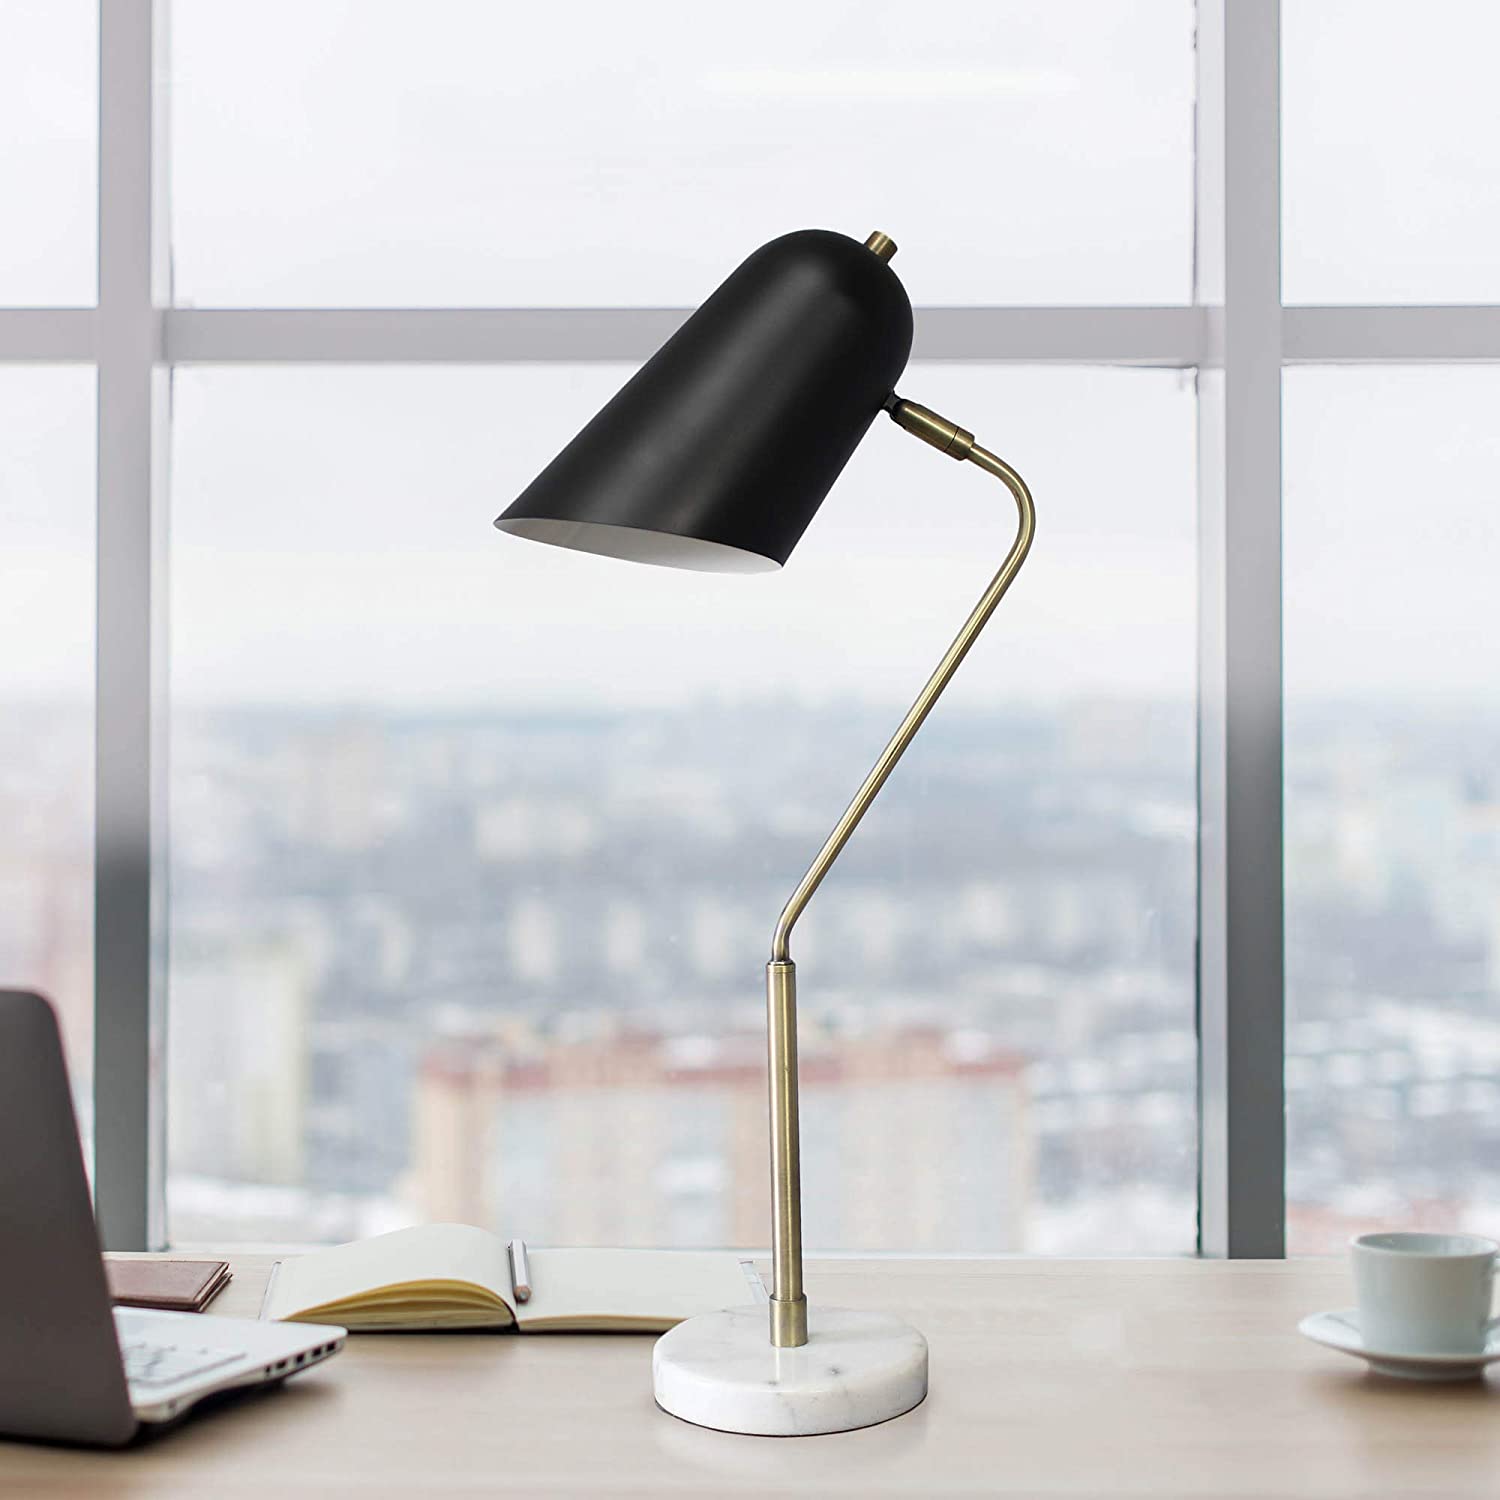 Lalia Home Decorative Asymmetrical Marble and Metal Desk Lamp with Black Sloped Shade